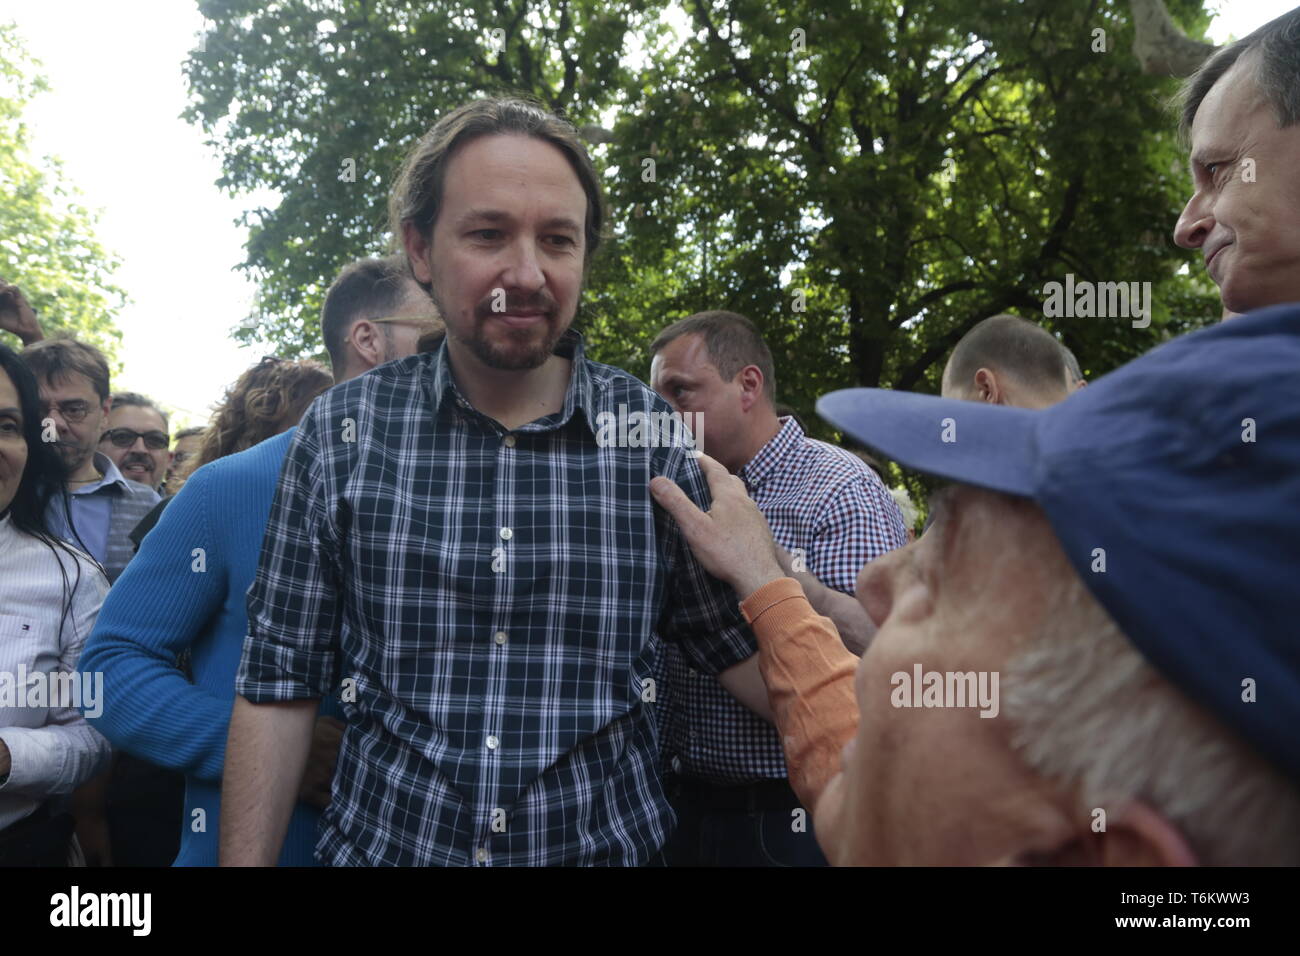 Pablo Iglesias, leader and congressman of Podemos seen speaking with a protester during the demonstration. Thousands of protesters demonstrate on the International Workers' Day convoked by the majority unions UGT and CCOO to demand policies and reductions in unemployment levels in Spain, against job insecurity and labour rights. Politicians of the PSOE and Podemos have participated in the demonstration. Stock Photo